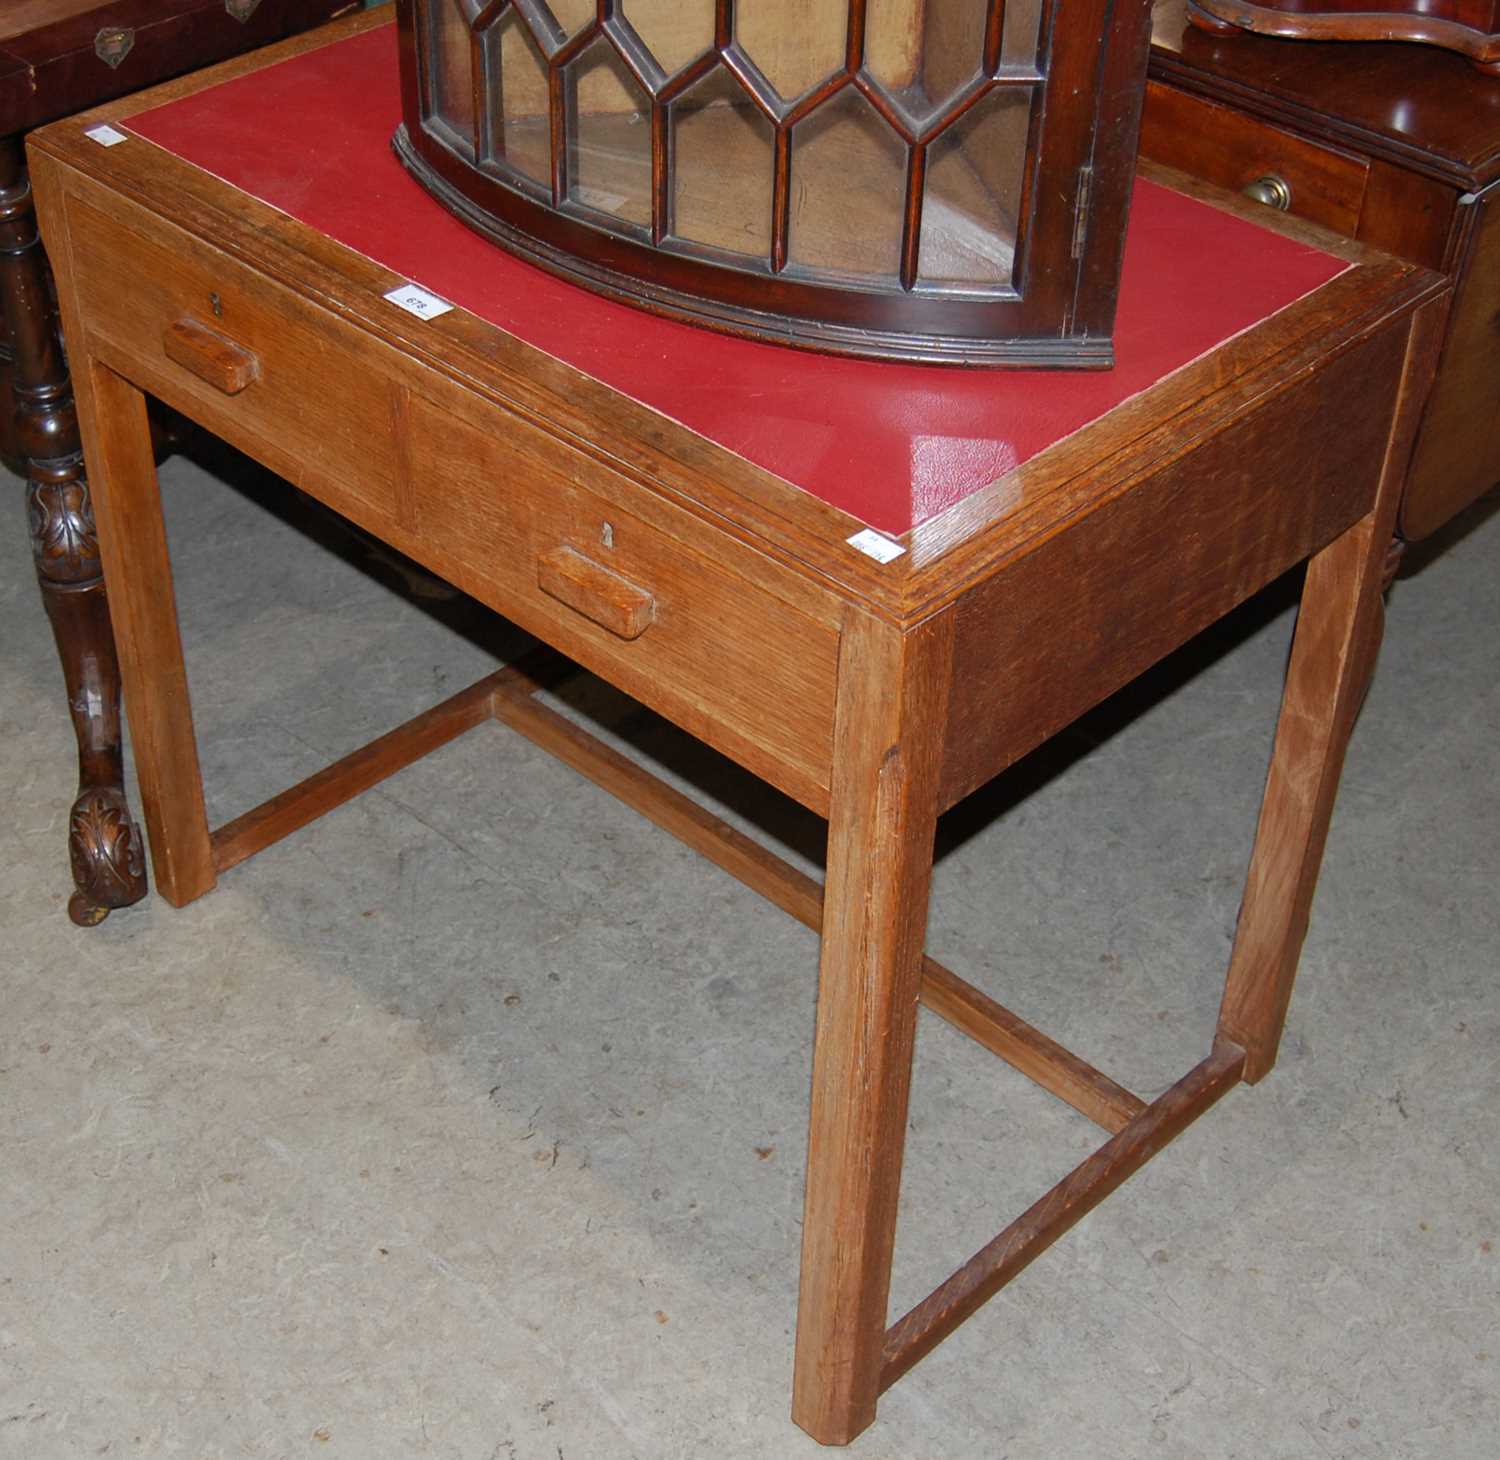 An early 20th century Art Deco style oak side table/ writing desk with red leatherette insert top